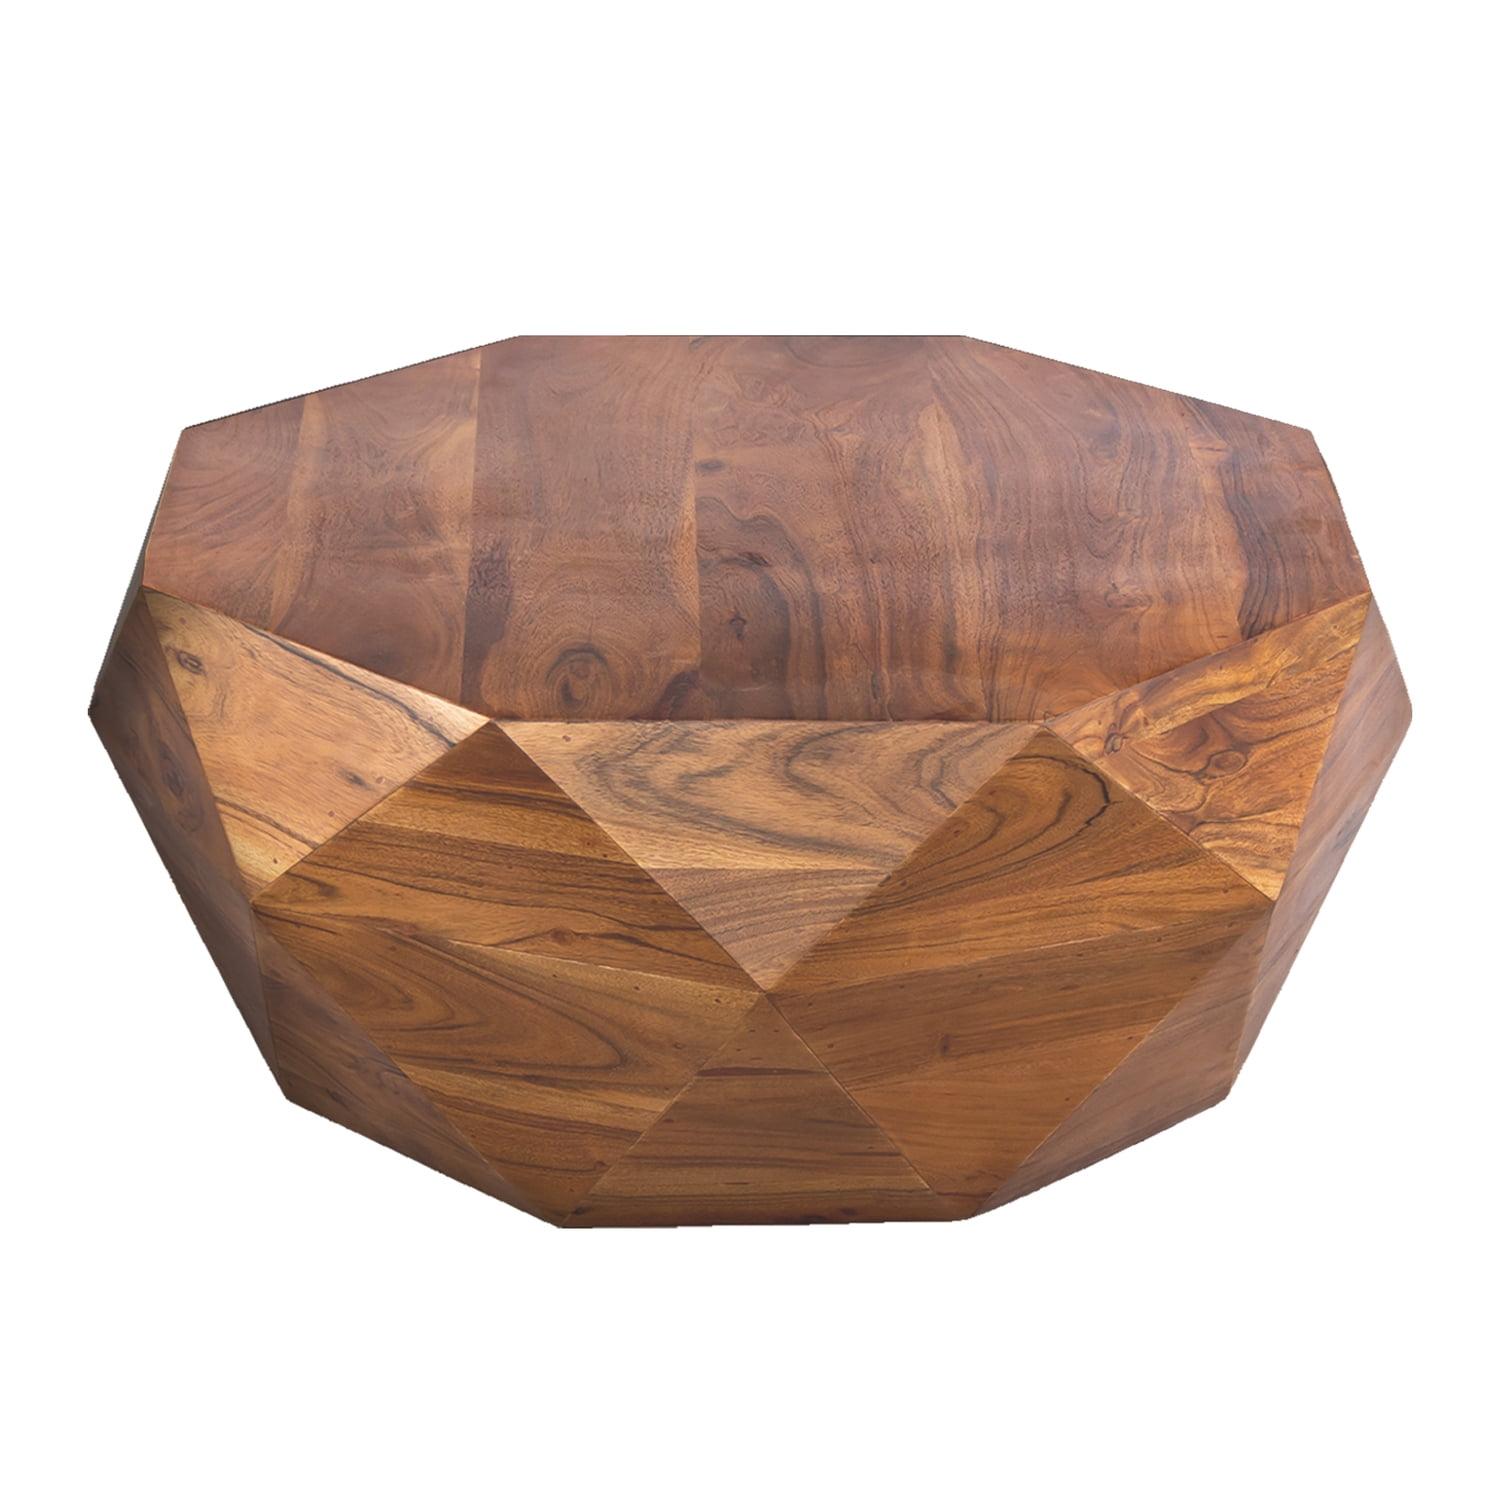 Octagonal Diamond-Patterned Acacia Wood Coffee Table in Natural Brown